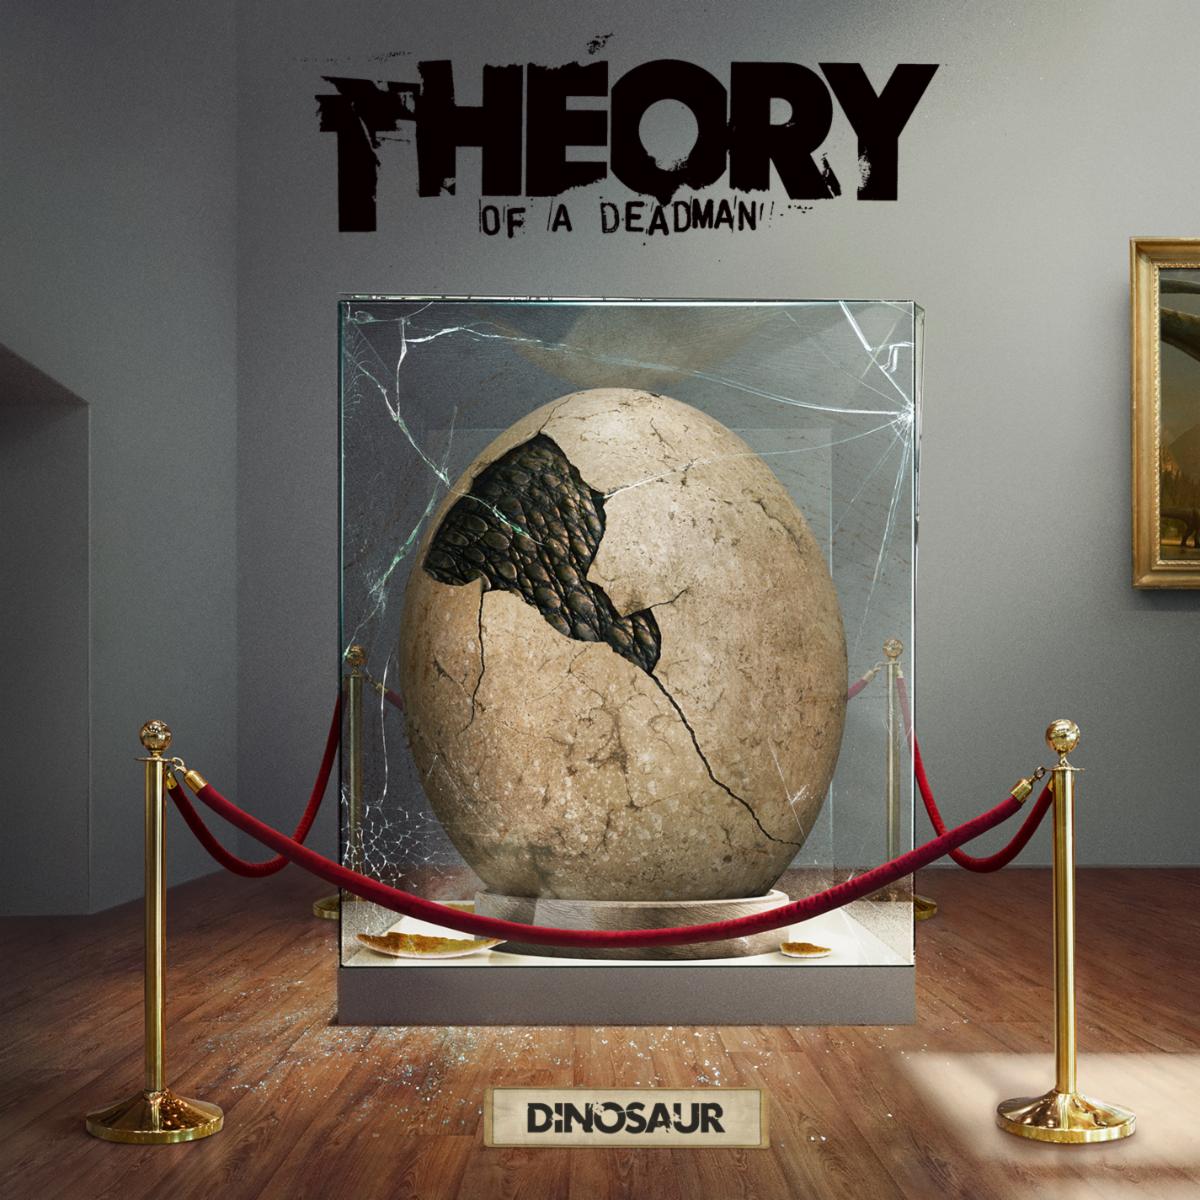 Theory Of A Deadman Releases New Single “Ambulance” and Announces New Album 'Dinosaur'